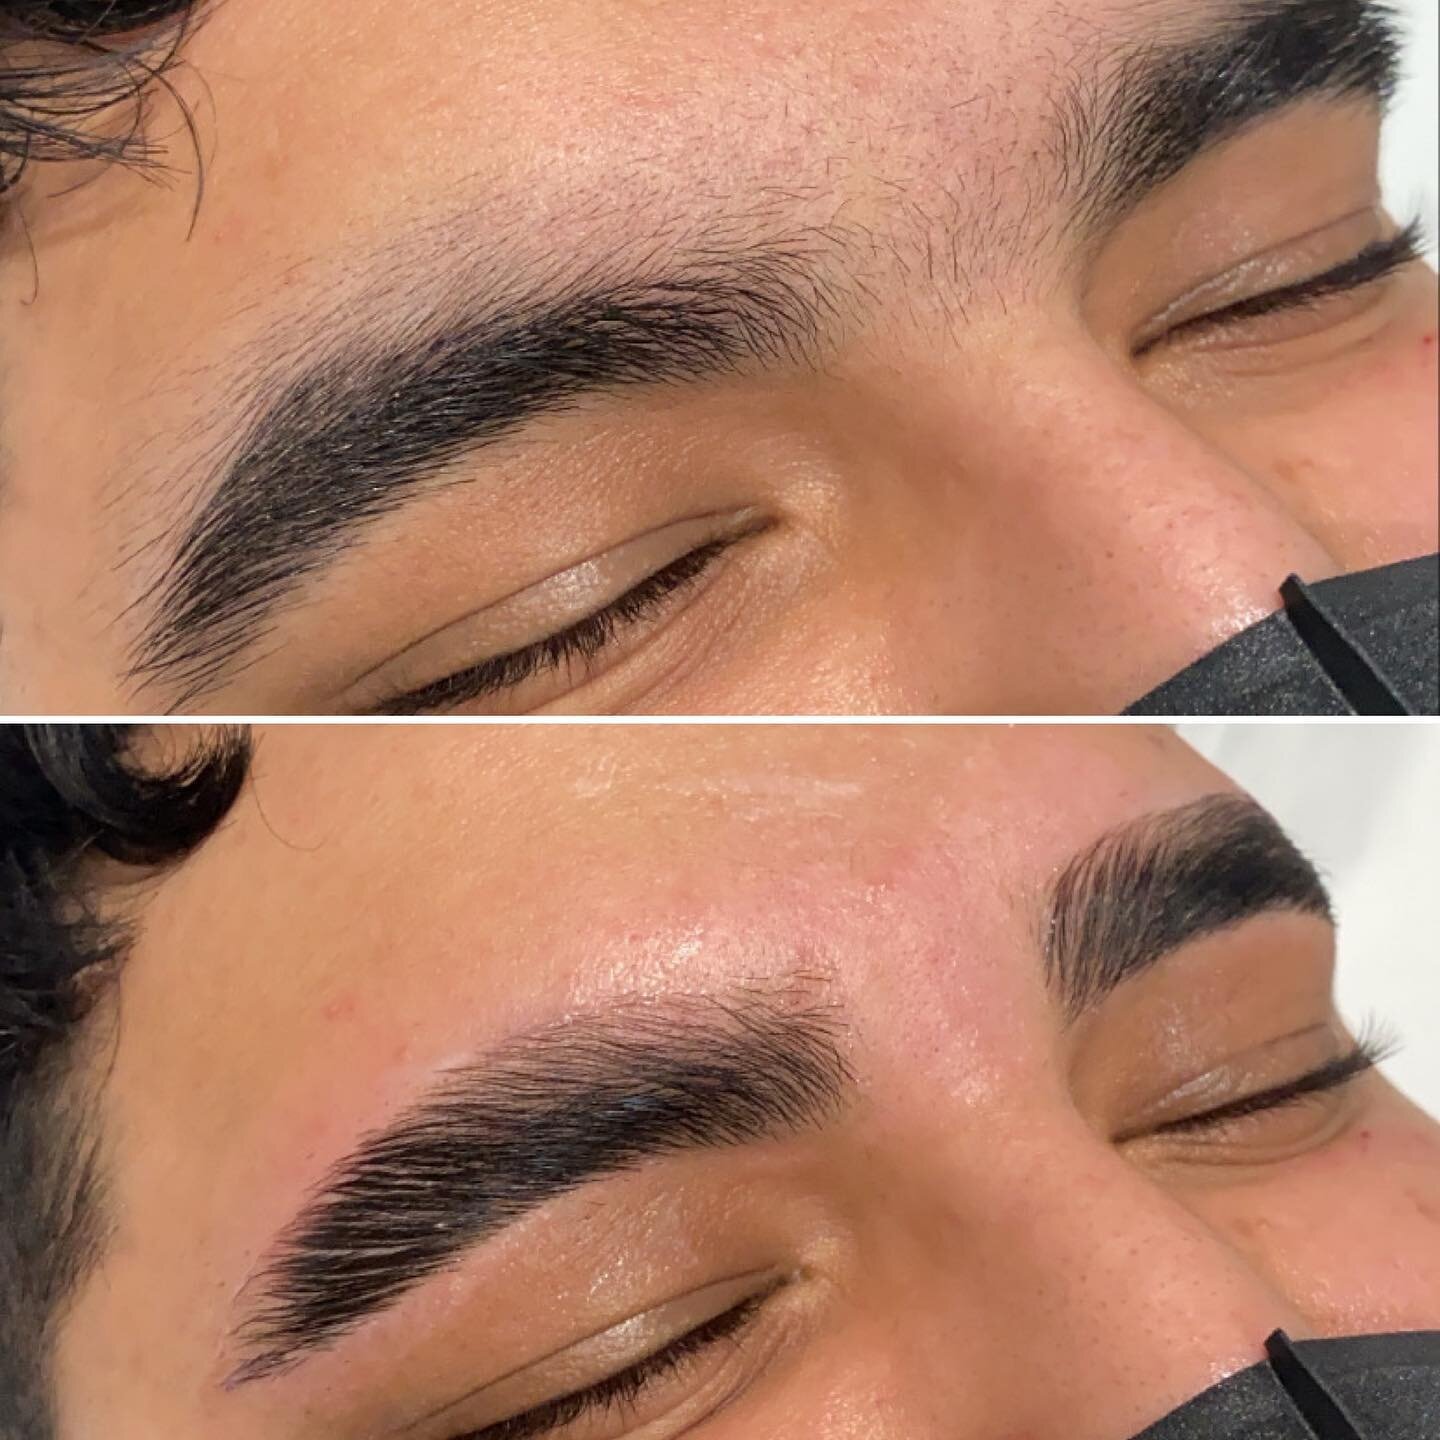 Brow transformation !! Loved creating these with @airliftyourlashes !! 
.
.
.
.
.
.
.
.
.#browlamination #browsofinstagram #browday #bigbrows #mumsofinstagram #dadsofinstagram #boybrows